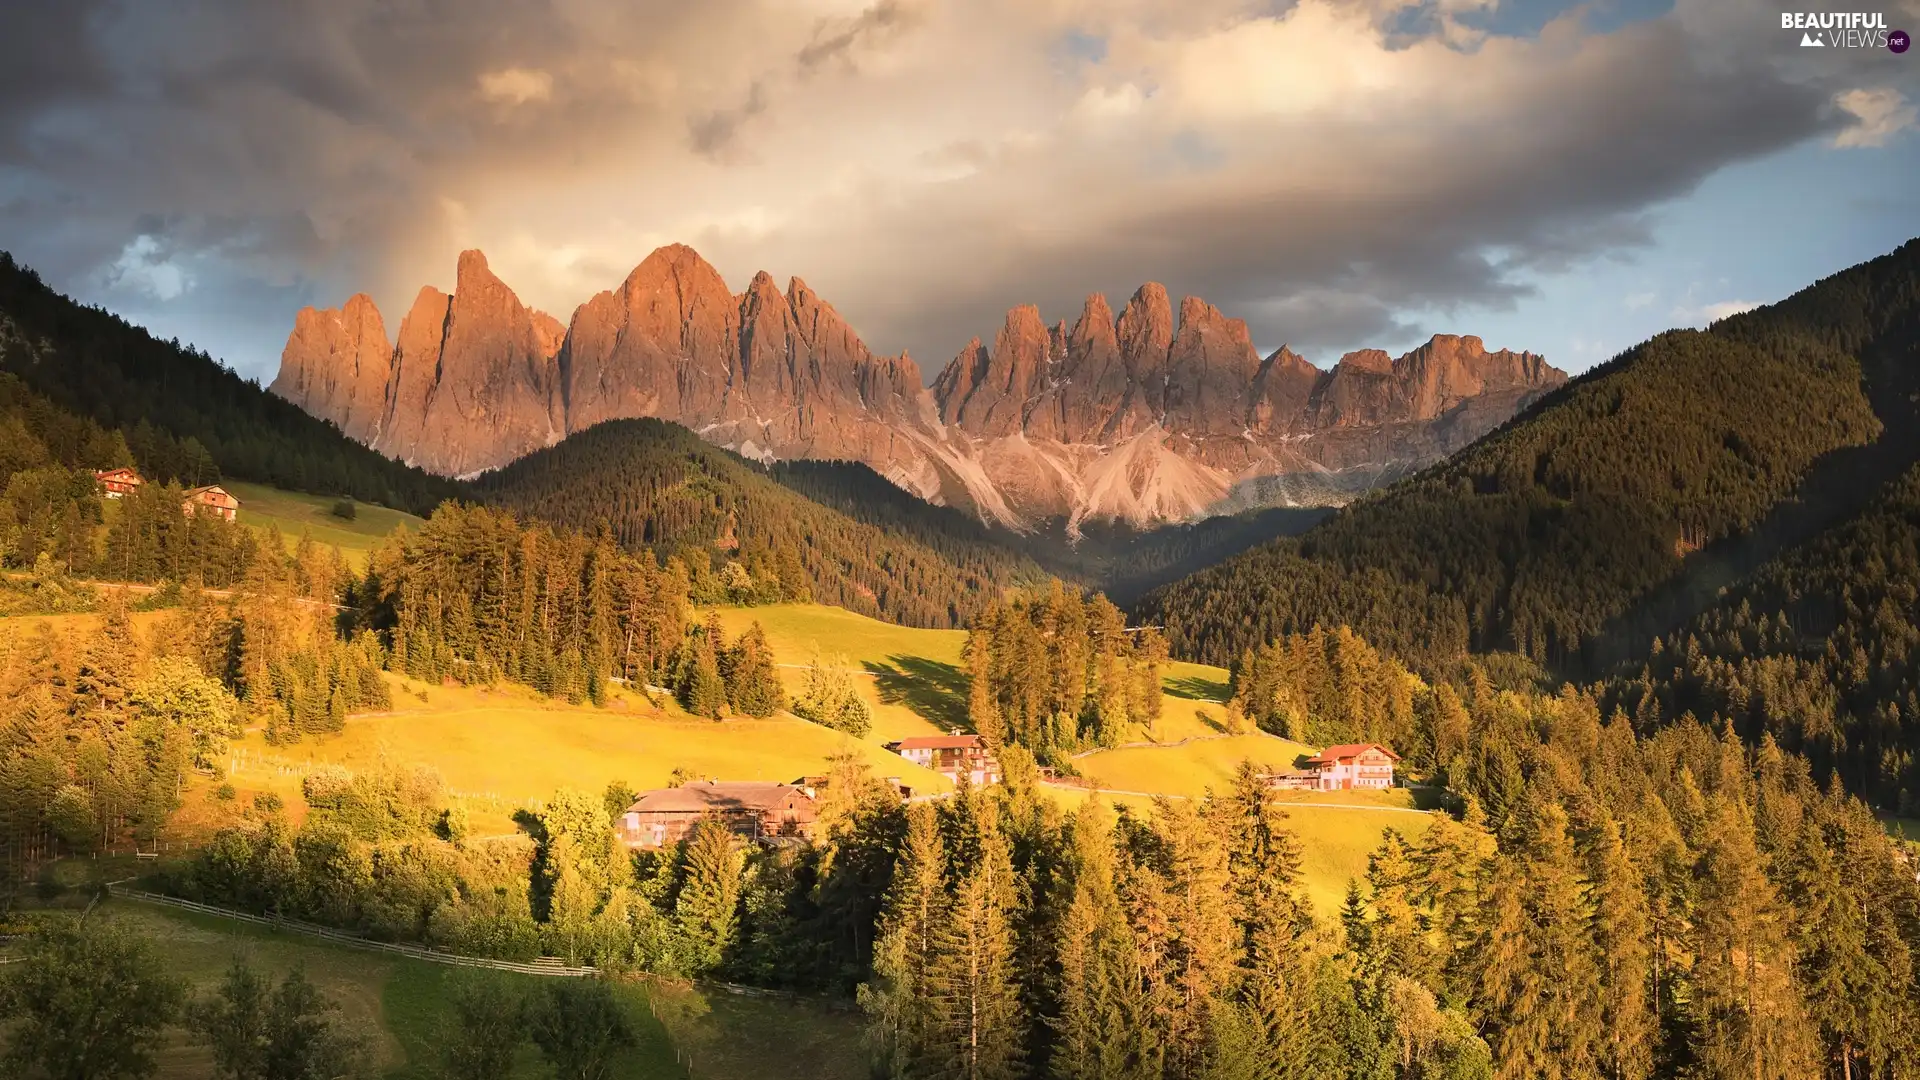 Dolomites, forest, clouds, trees, Houses, Mountains, Italy, viewes